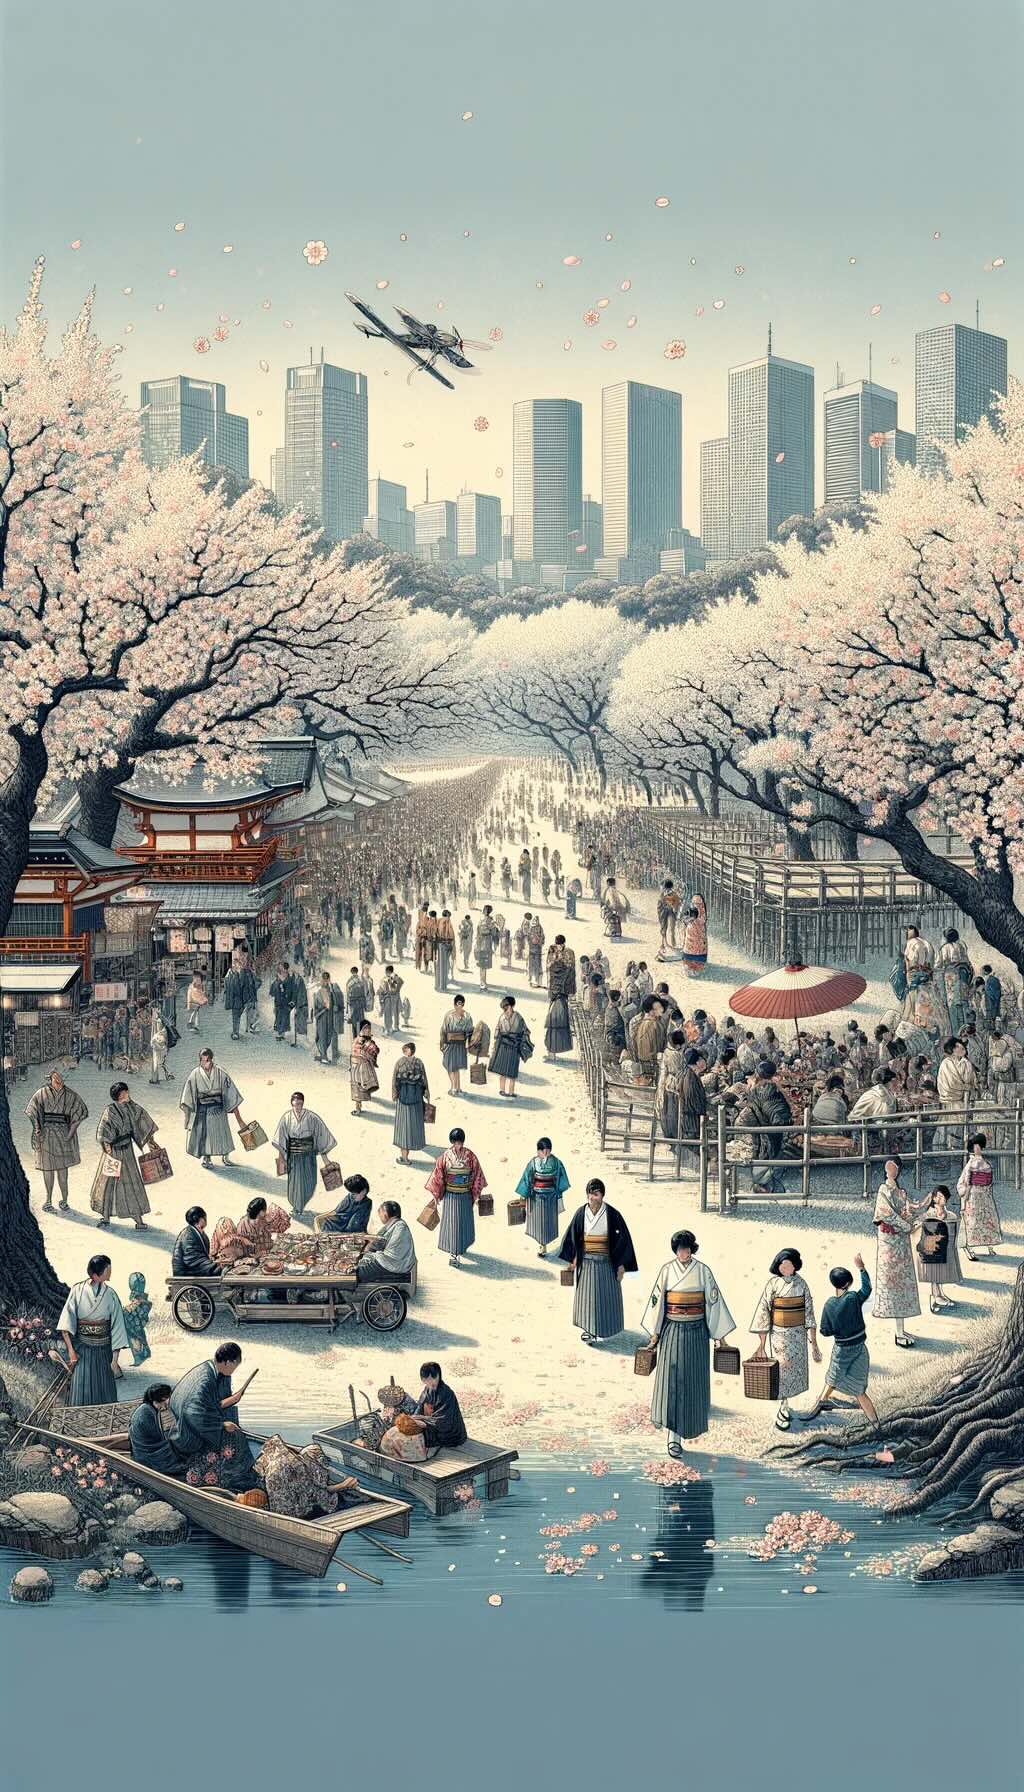 Evolution of the Hanami tradition over time in Japan transformation of Hanami from an elite pastime to a national symbol and a modern celebration, blending historical elements with contemporary Japanese life amidst the beauty of cherry blossoms